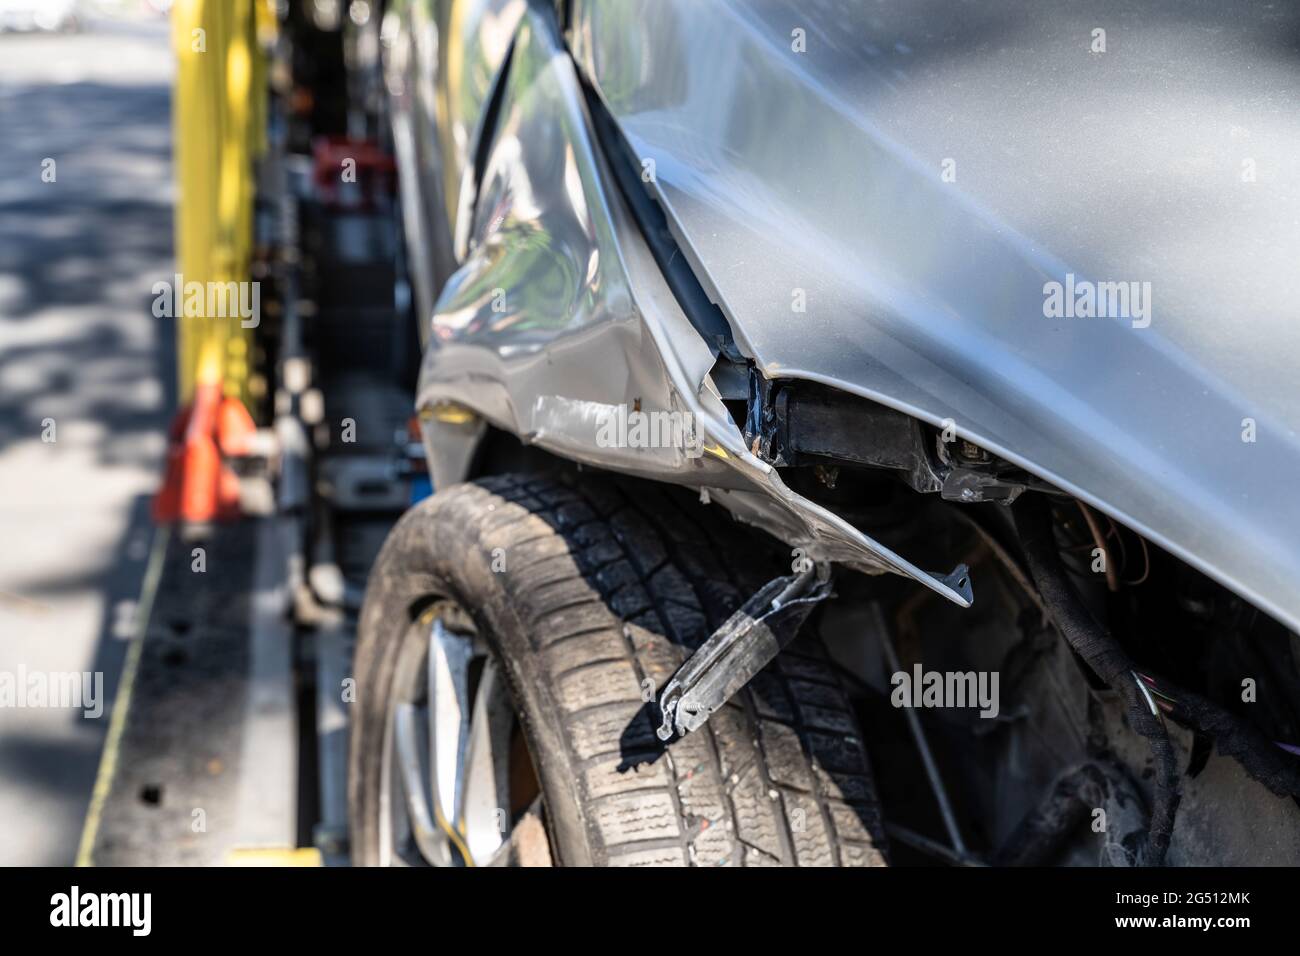 Unsafe Roads Warning. Car Insurance And Repair Stock Photo